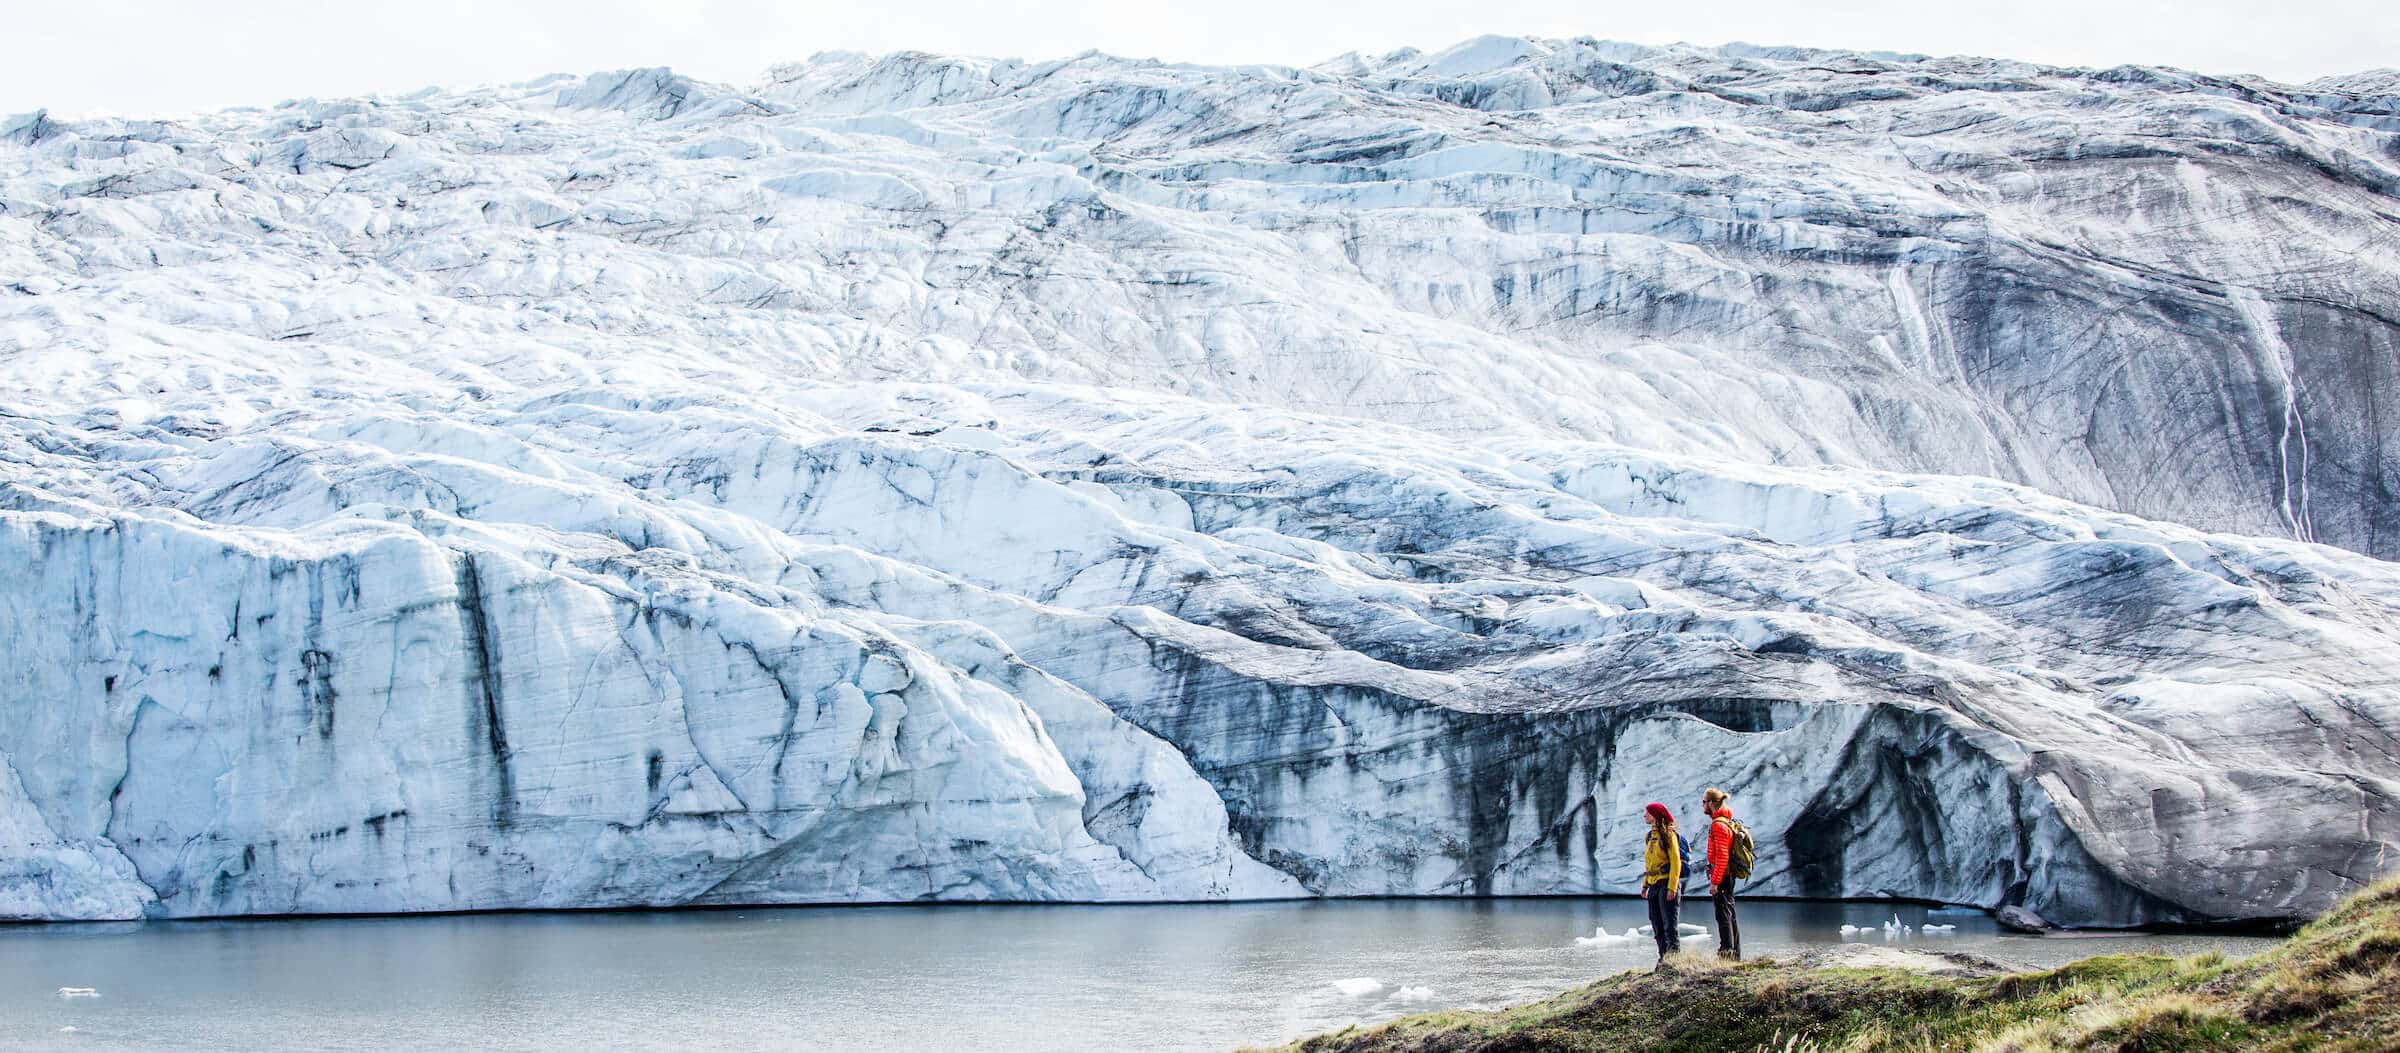 Two hikers reach the Russell Glacier, part of the Greenland Ice Sheet, in the Kangerlussuaq backcountry. By Raven Eye Photography